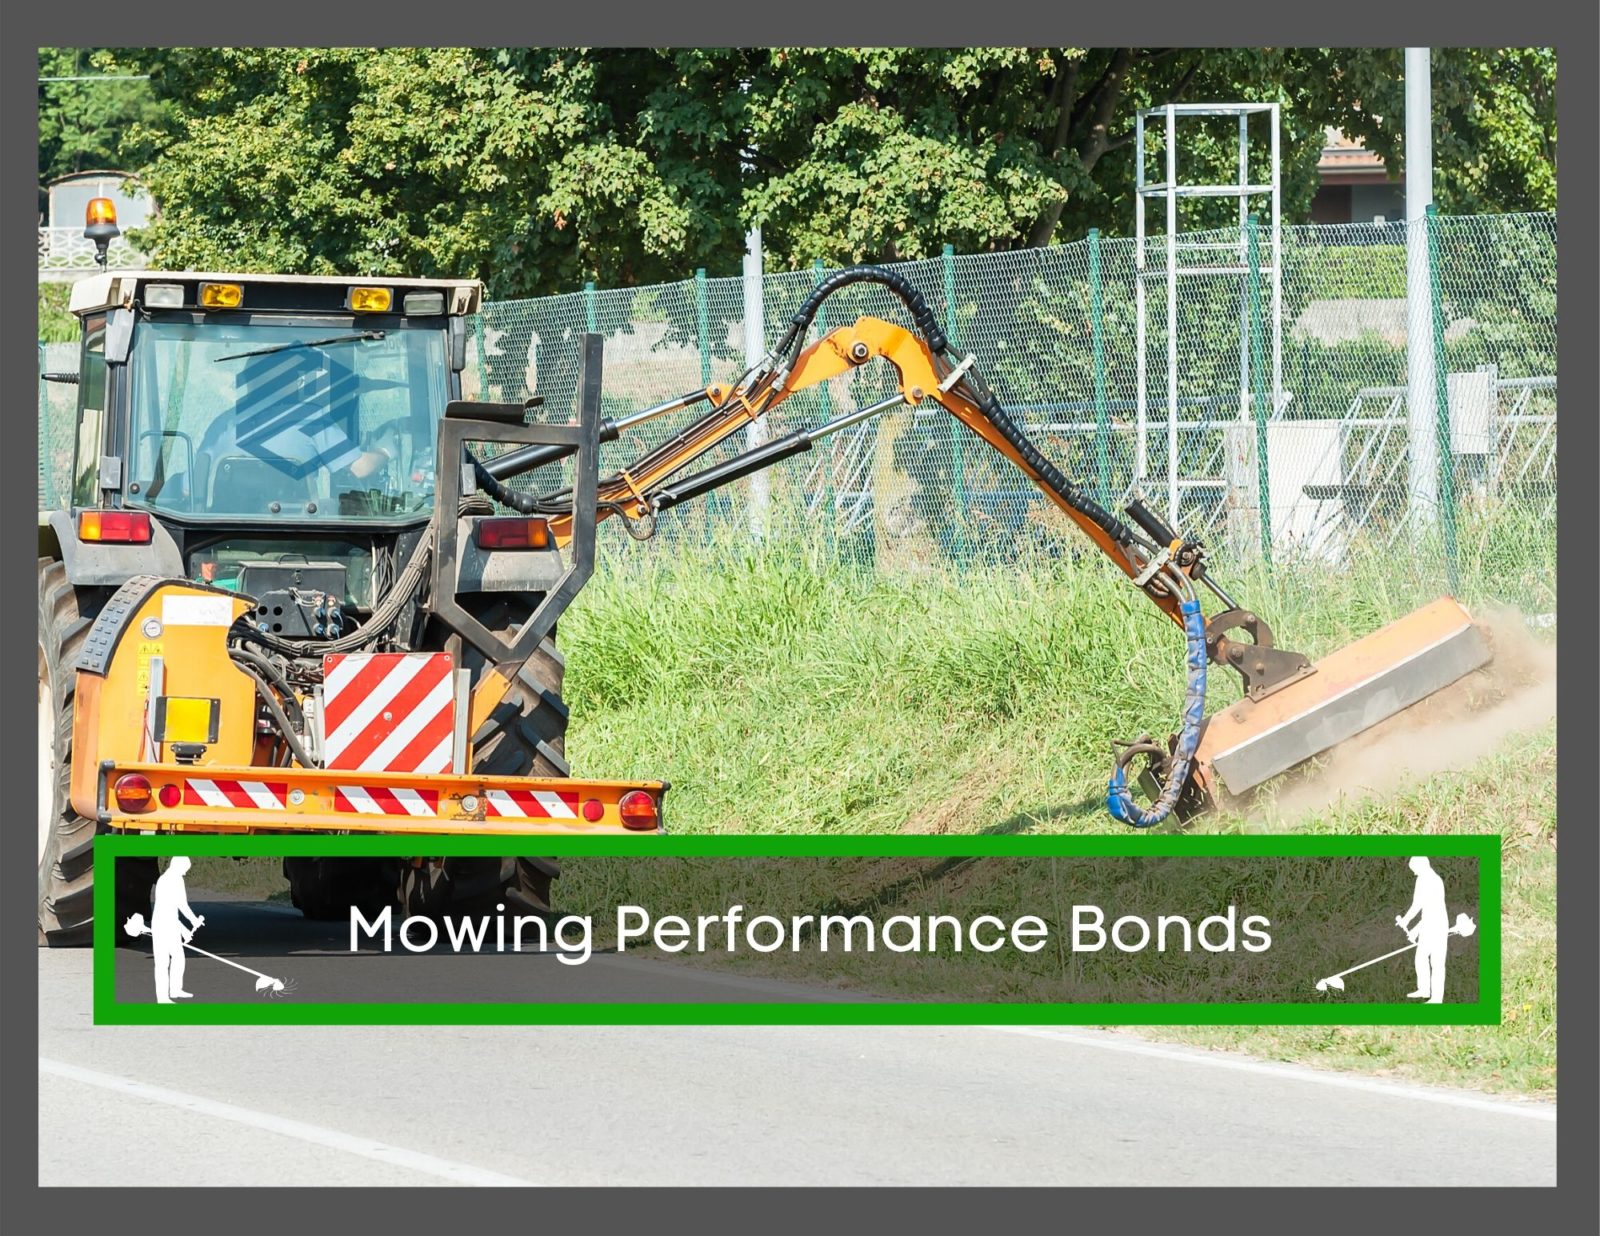 Mowing Performance Bonds - Picture of a mower in the background